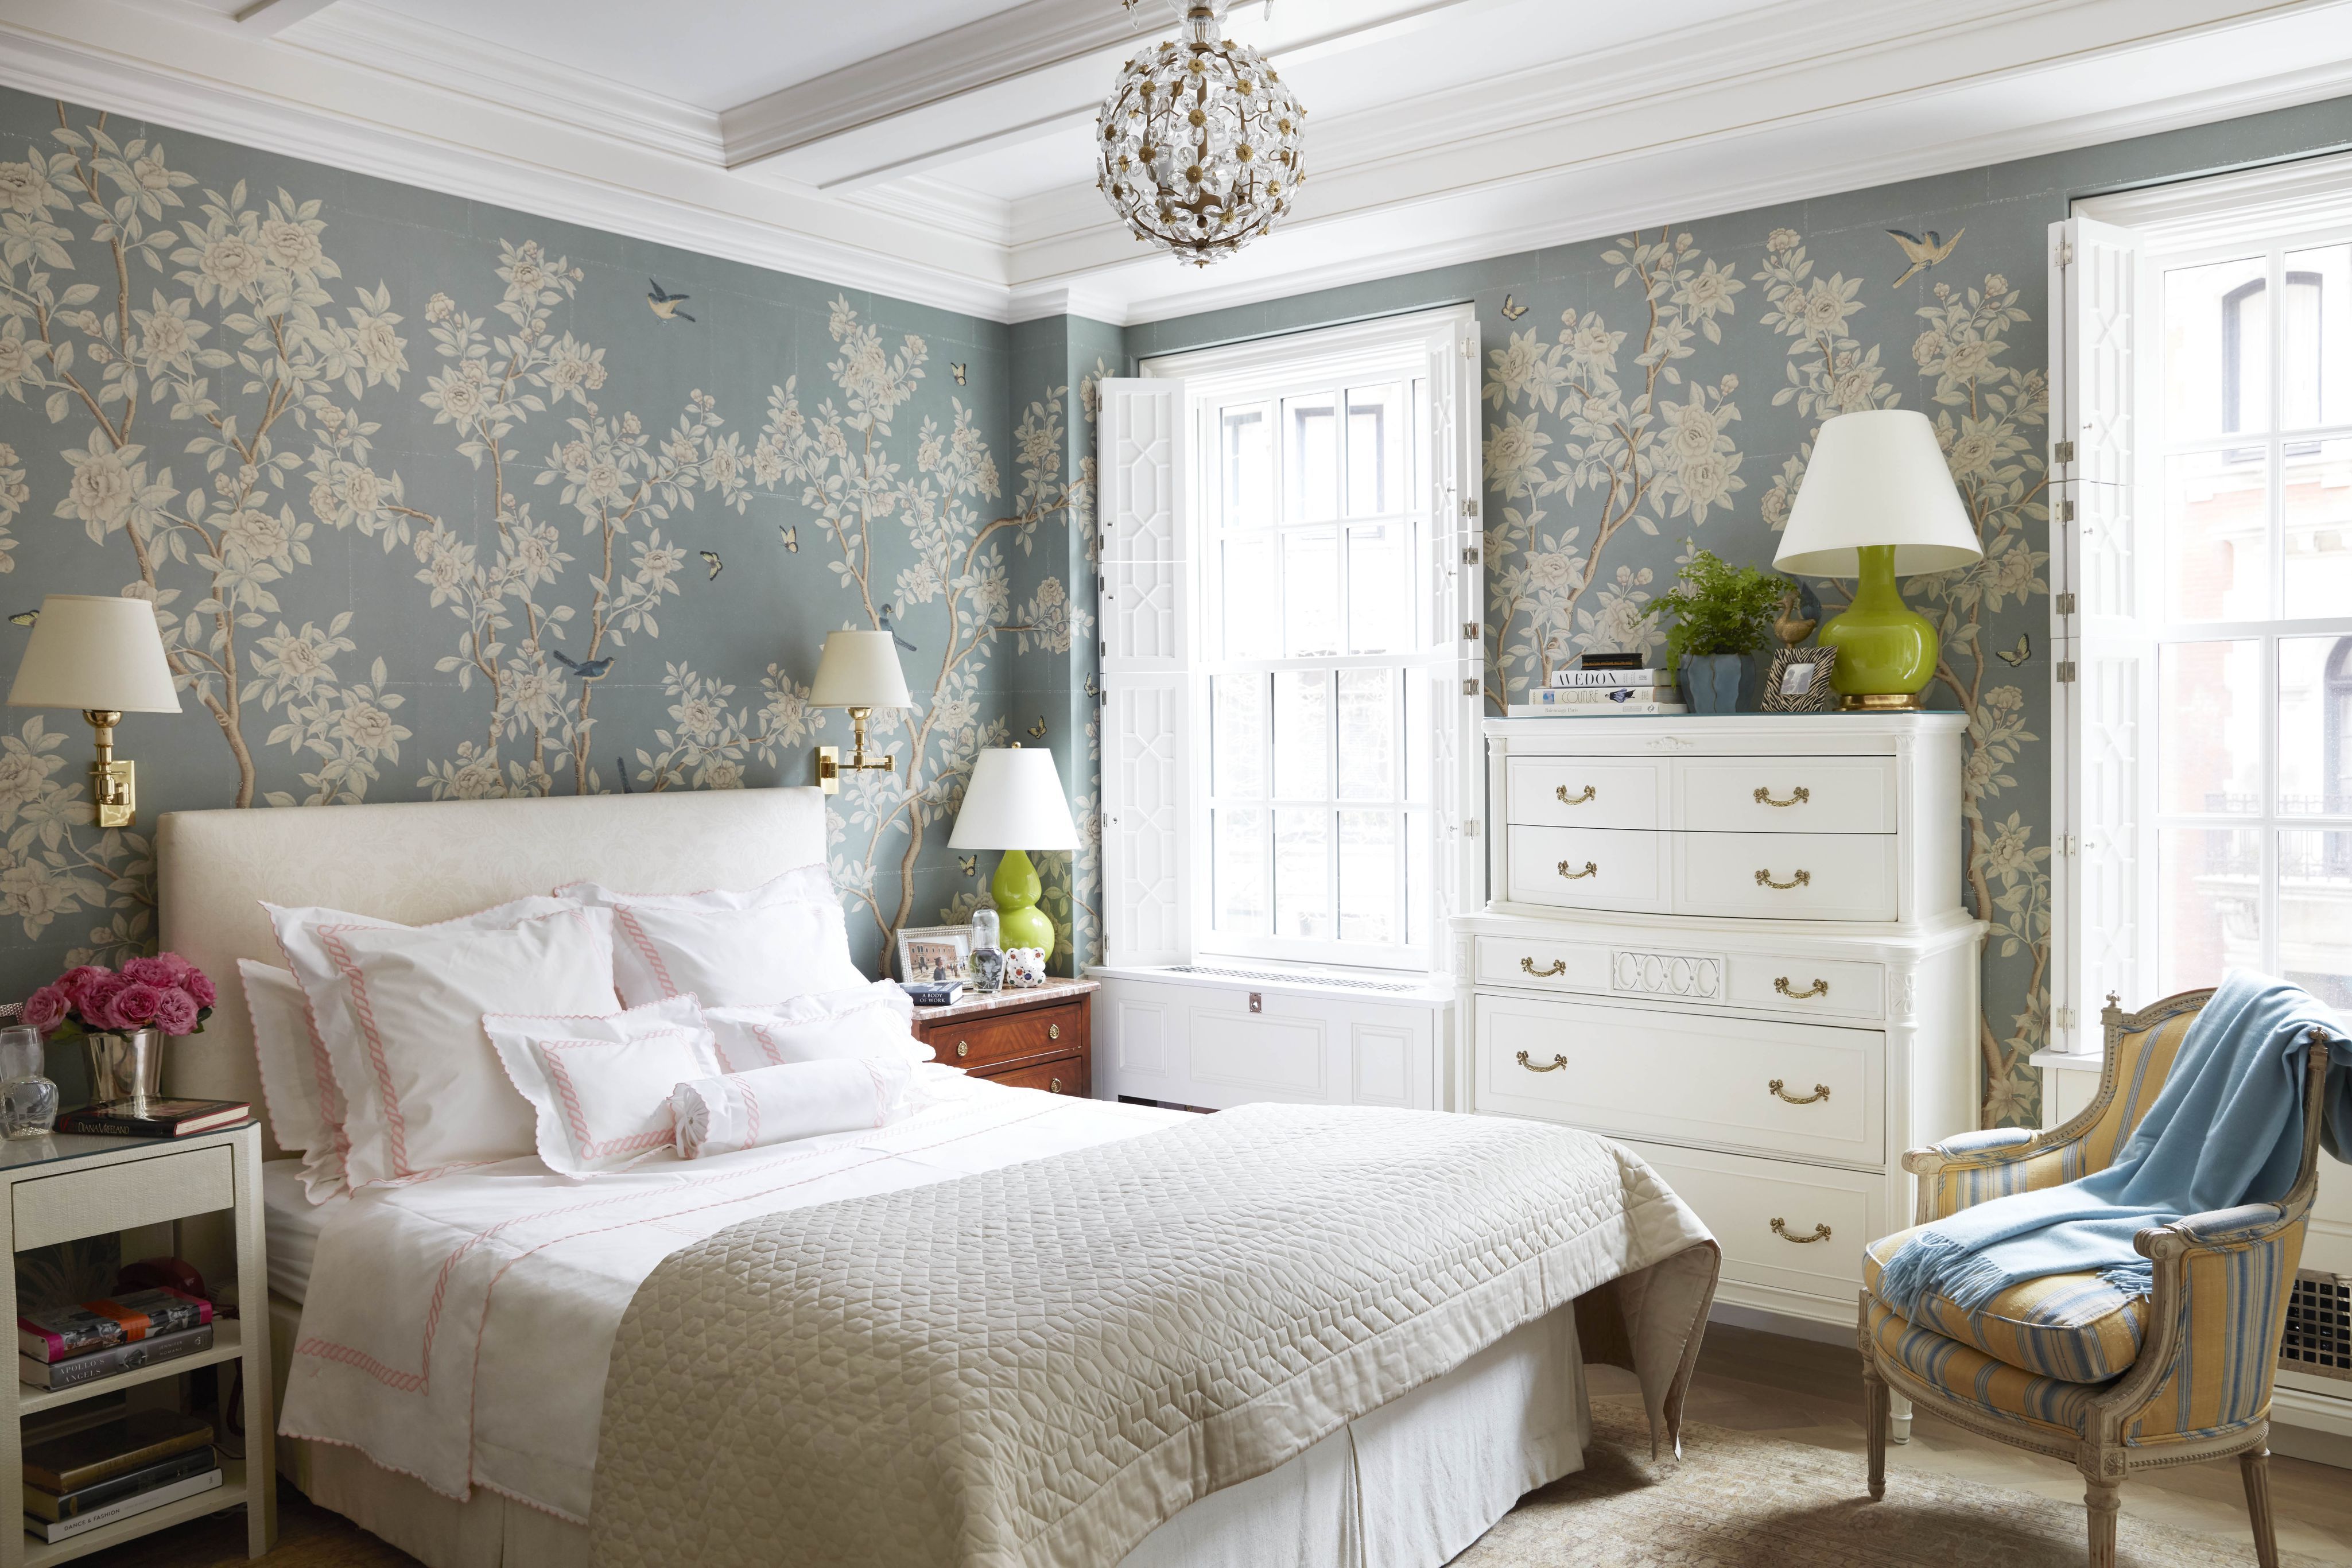 5 Unique Wallpaper Patterns For Bedrooms That Make A Statement